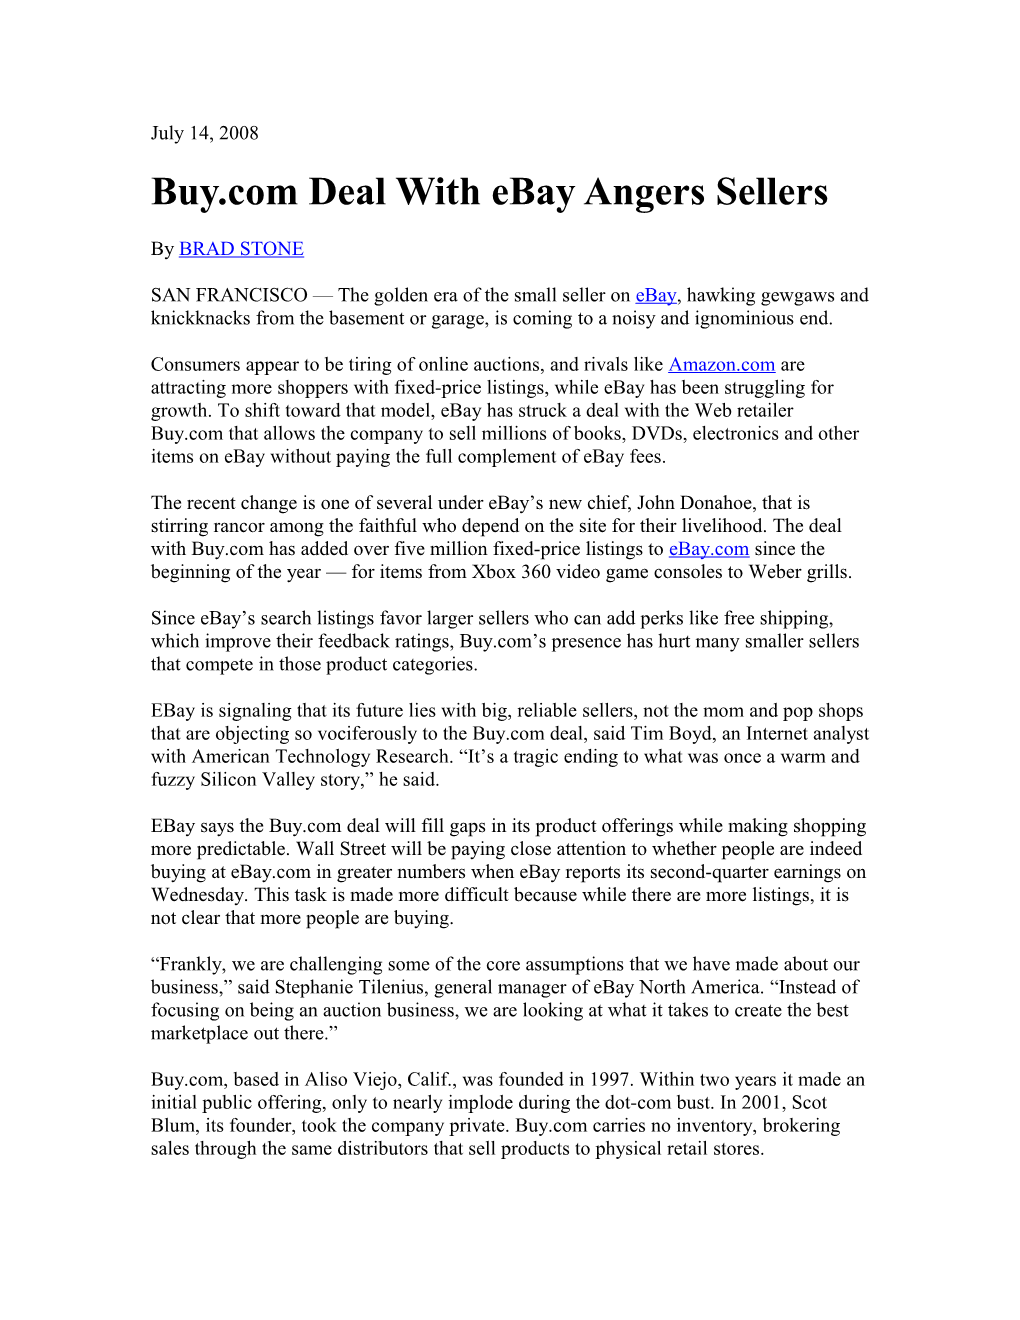 Buy.Com Deal with Ebay Angers Sellers